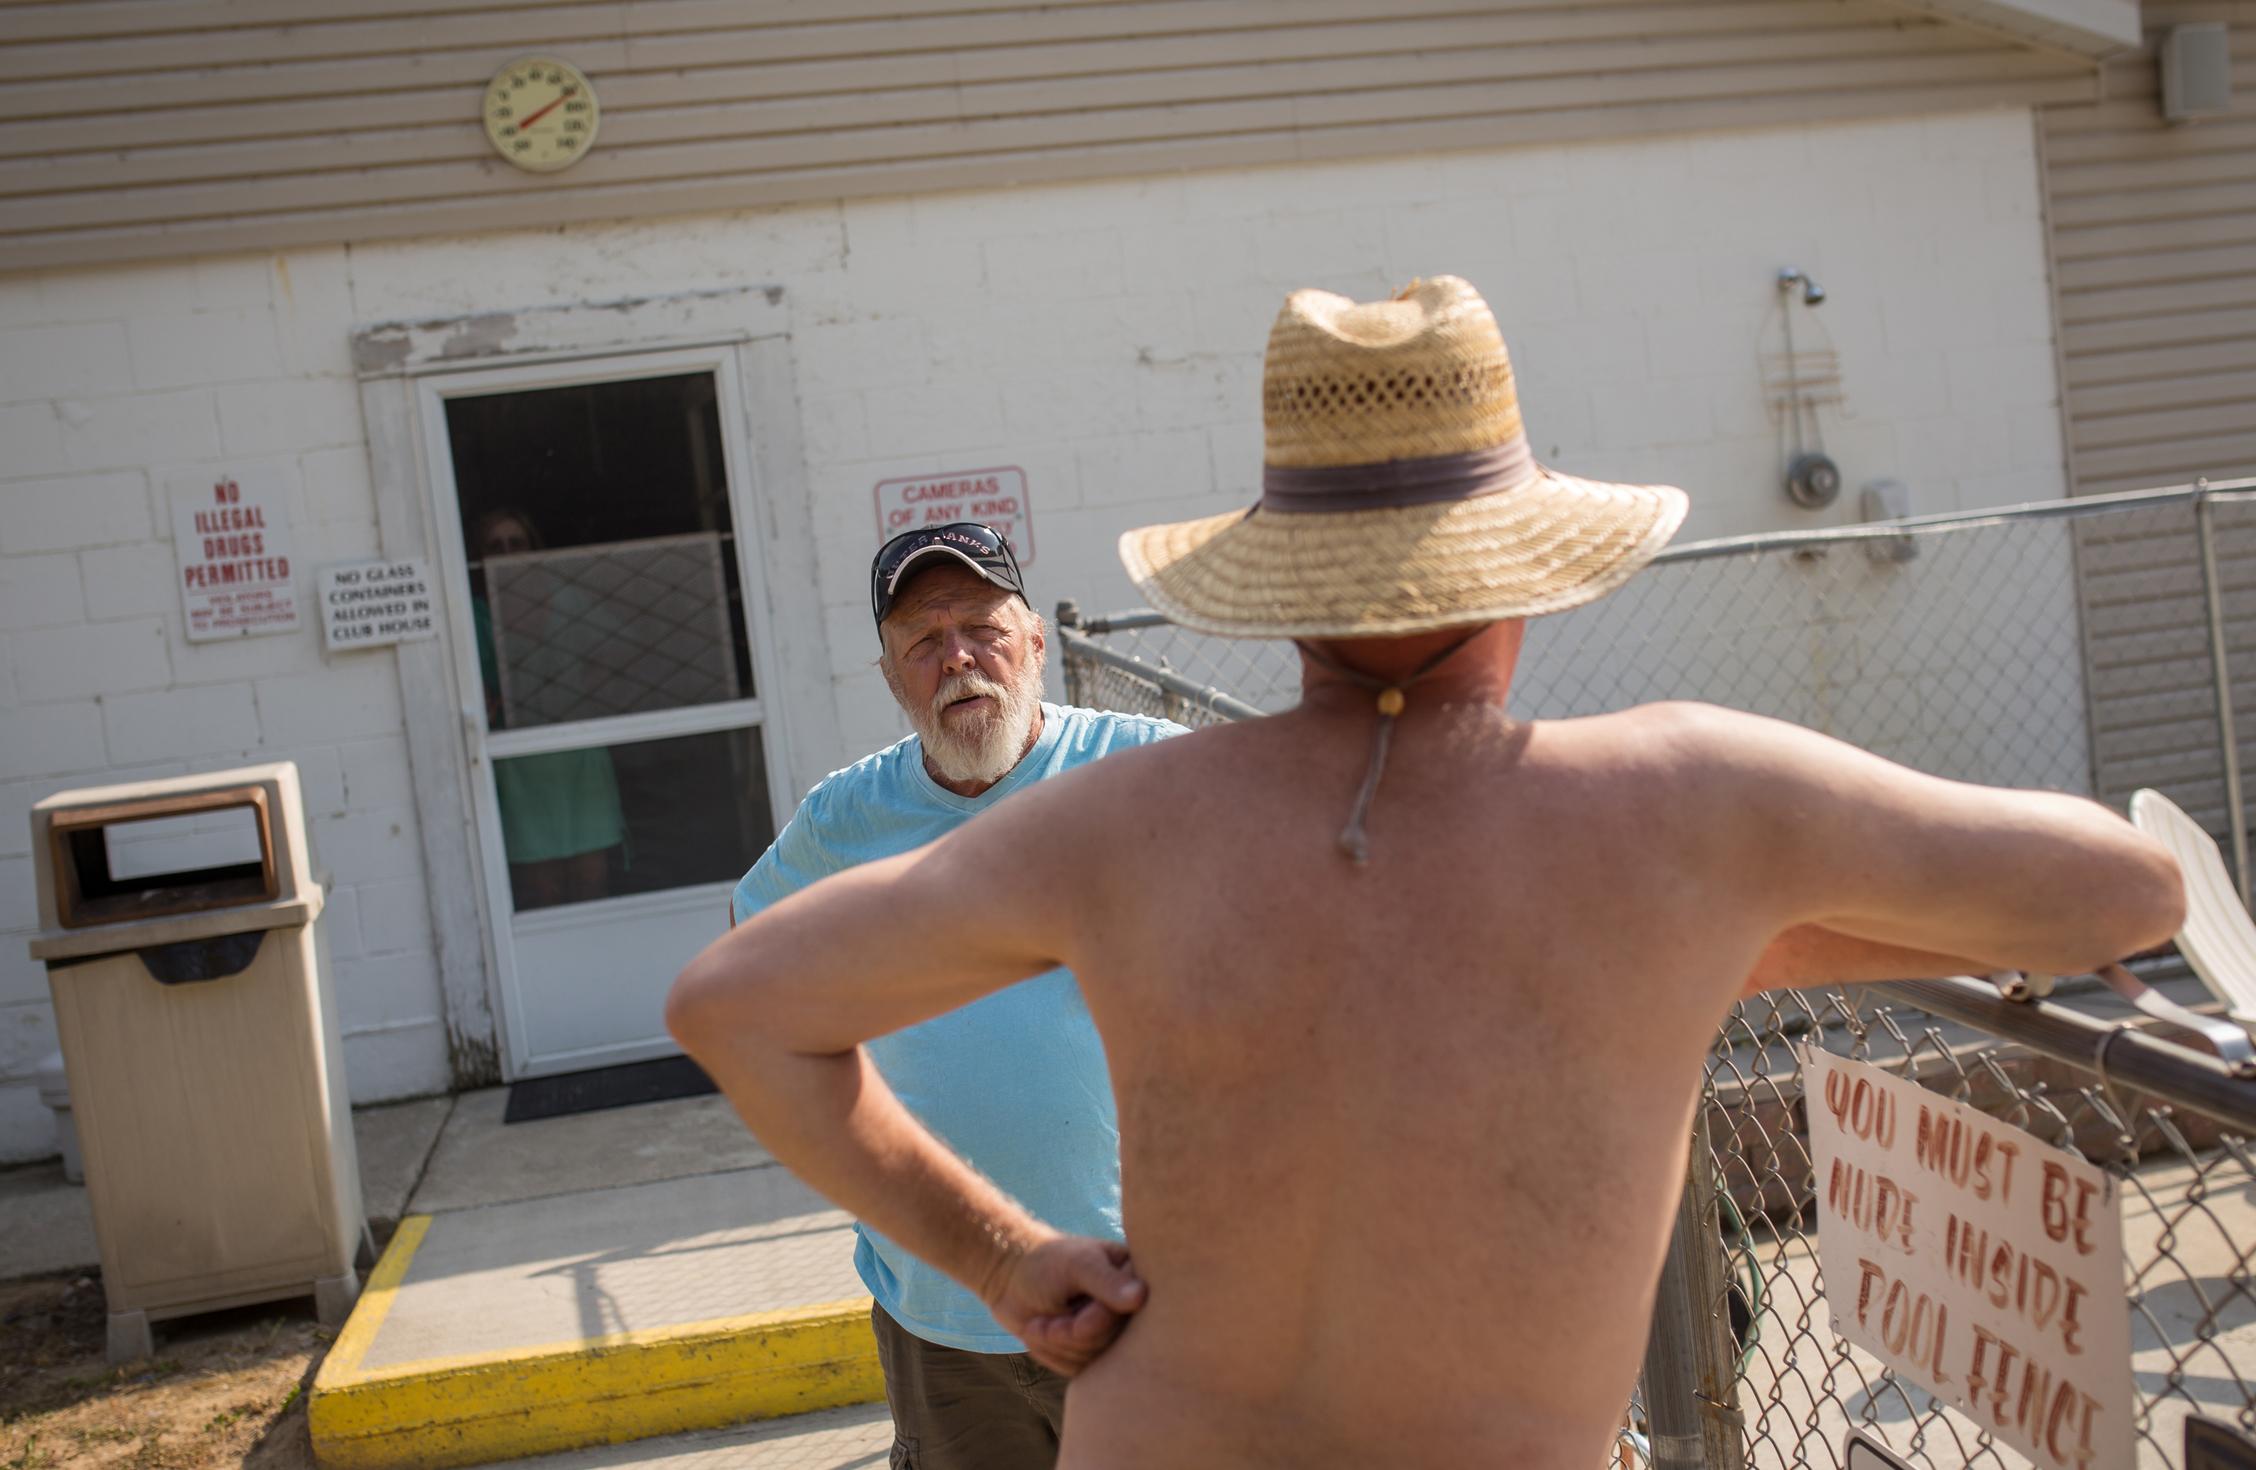 Nudity a way of life at campground in North Adams pic